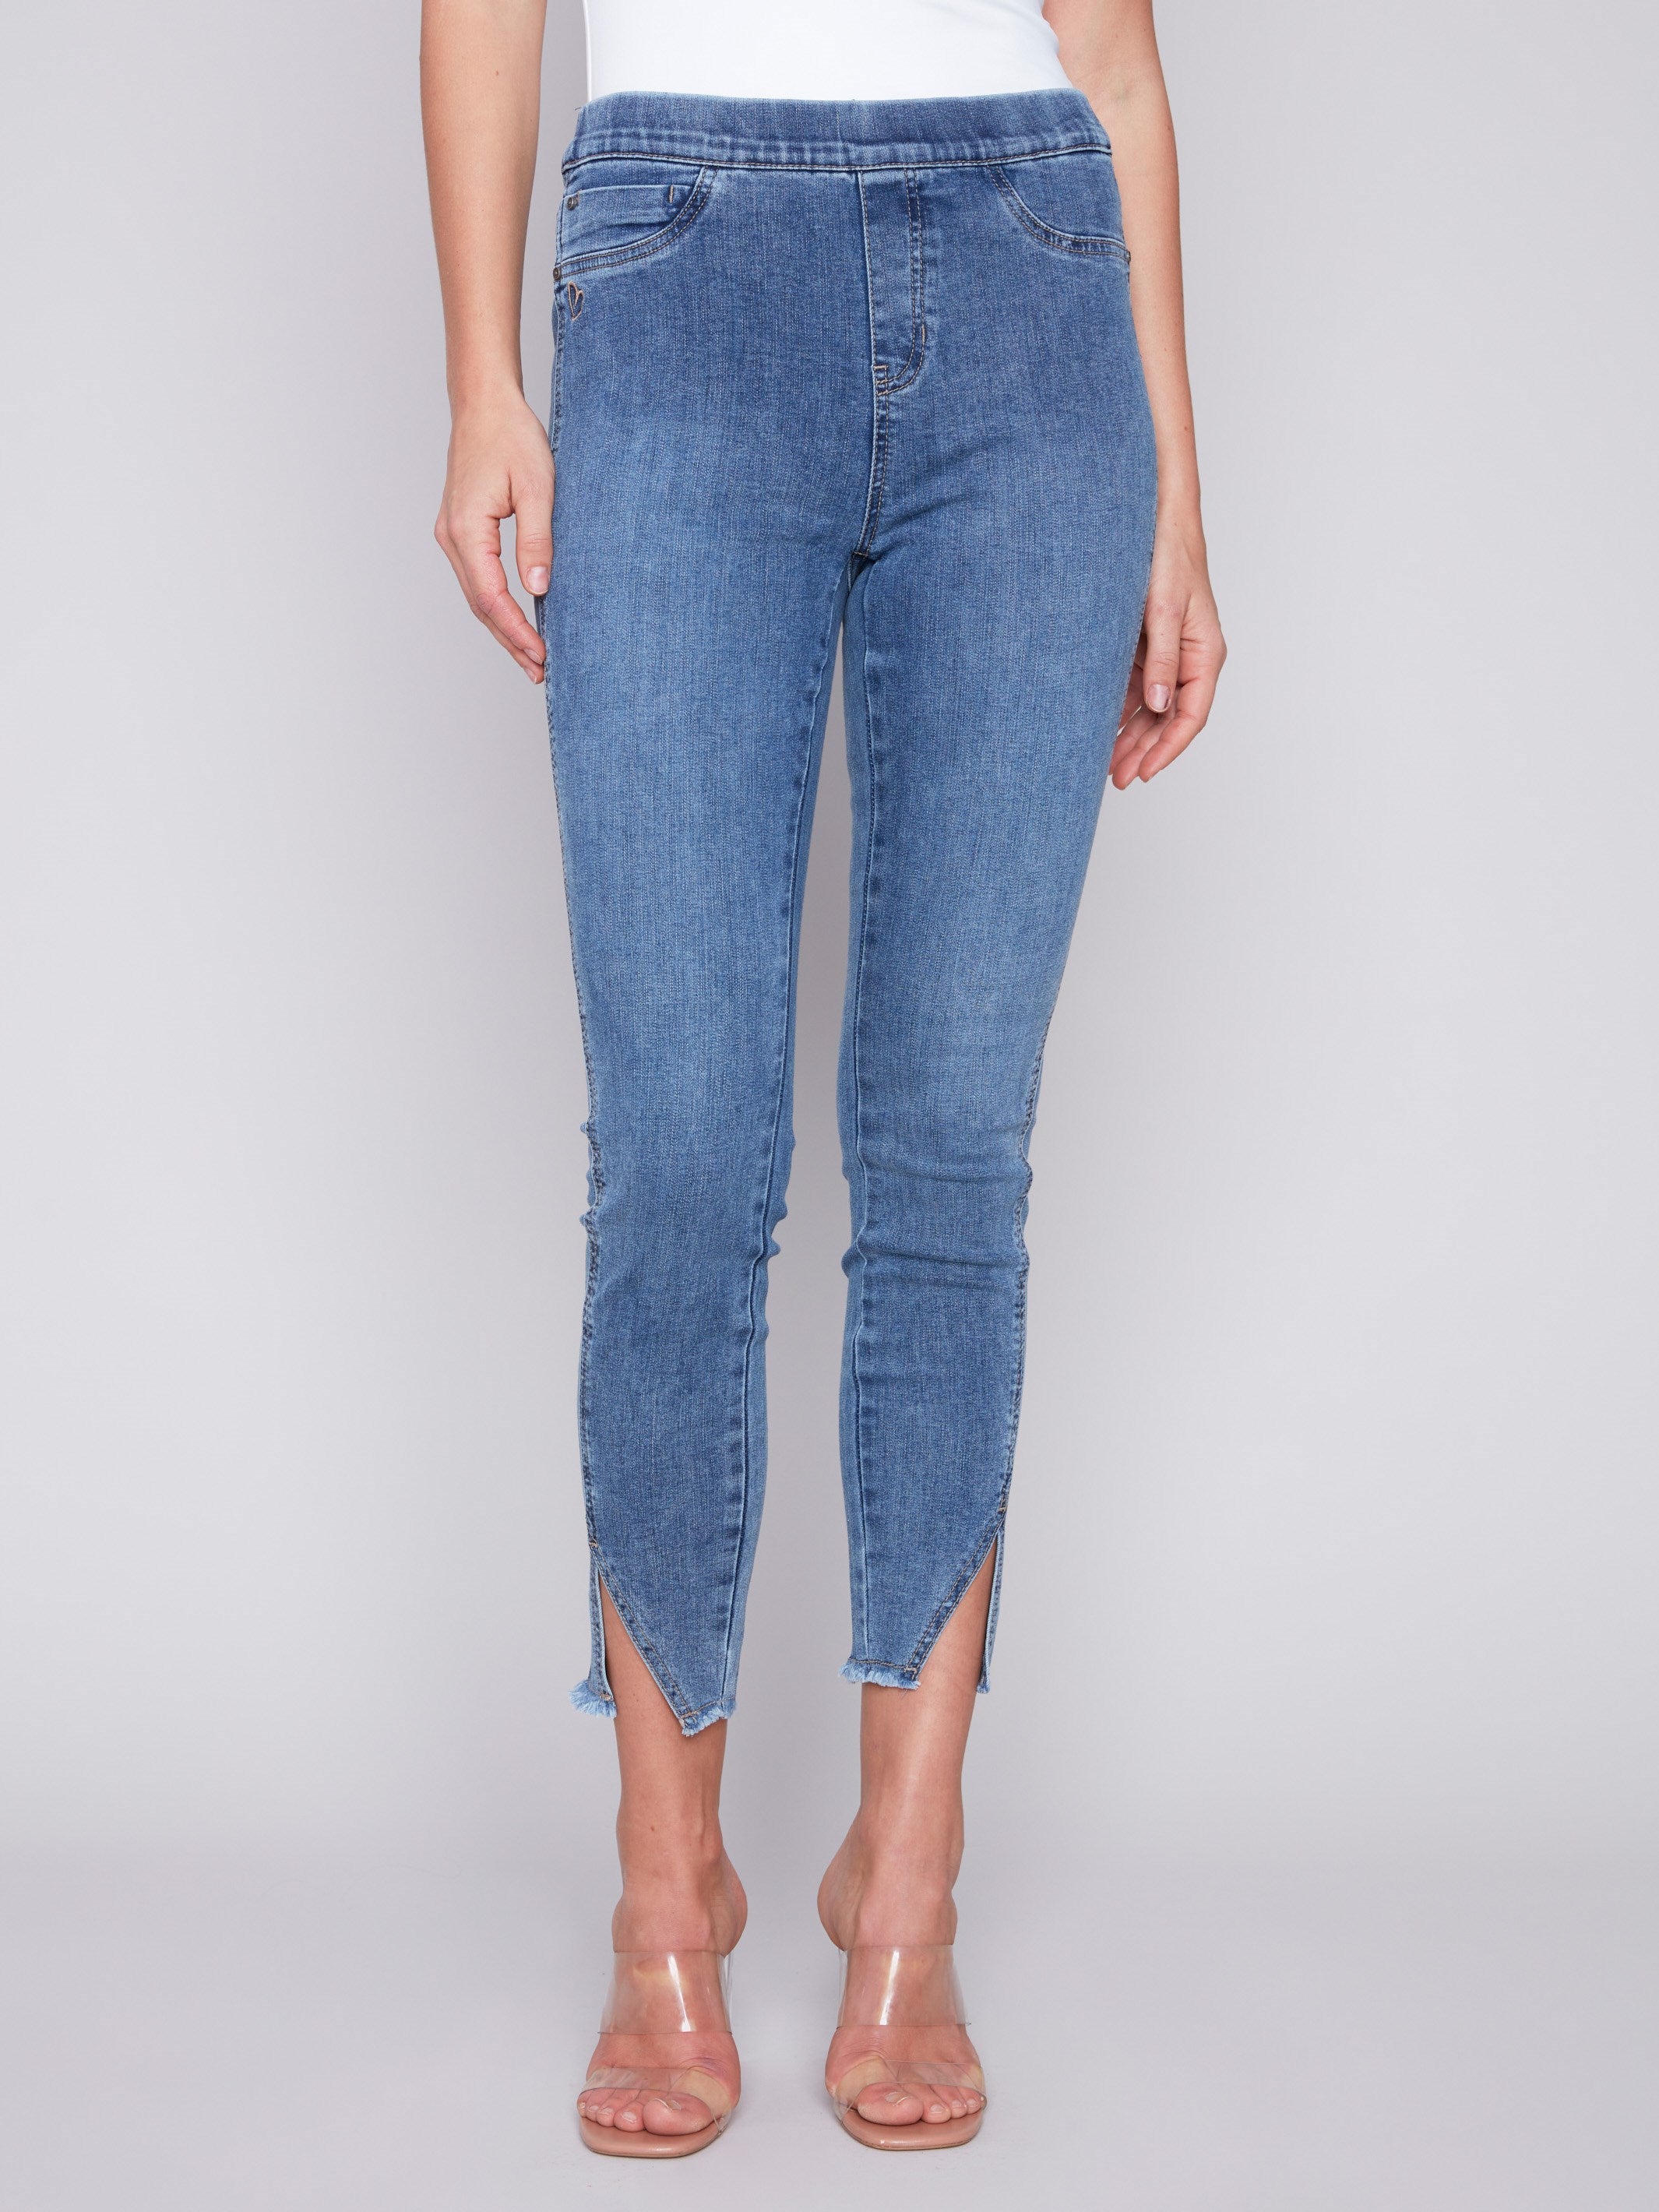 Charlie B - Pull-On Stretch Twill Jean With Side Hem Bow Detail